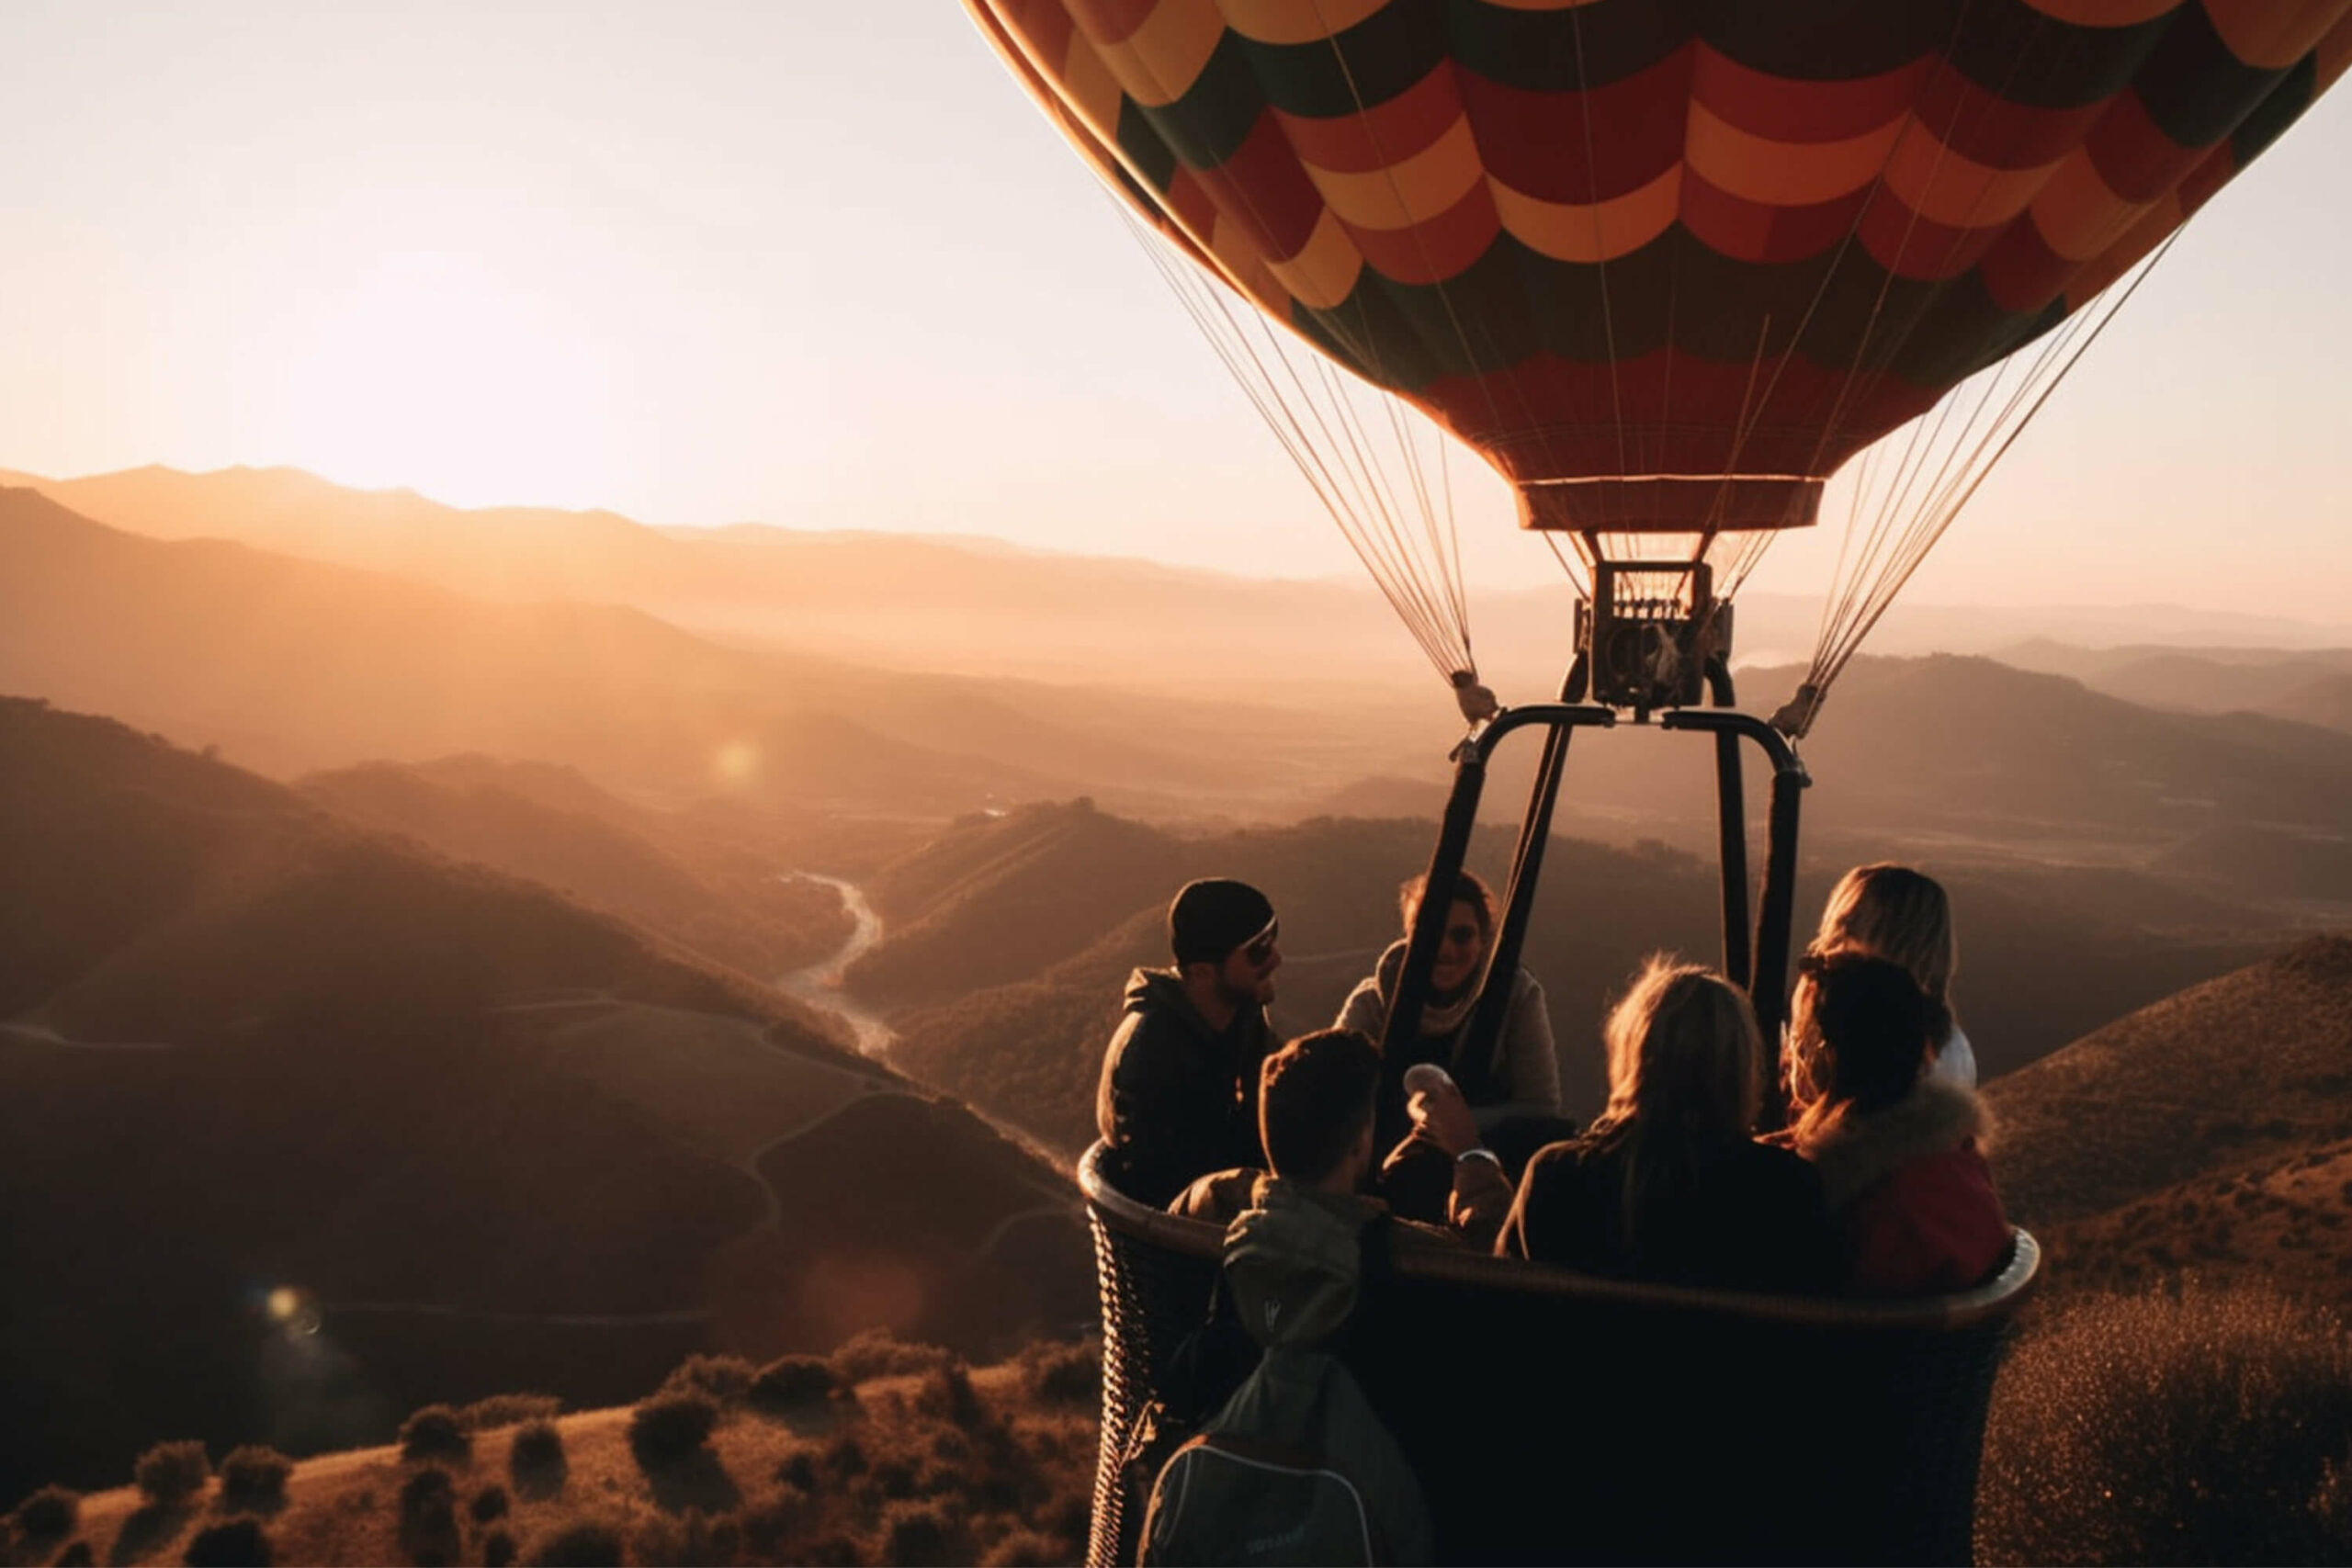 A group of people enjoying a scenic view from a hot air balloon during their holiday in Mallorca, Spain.